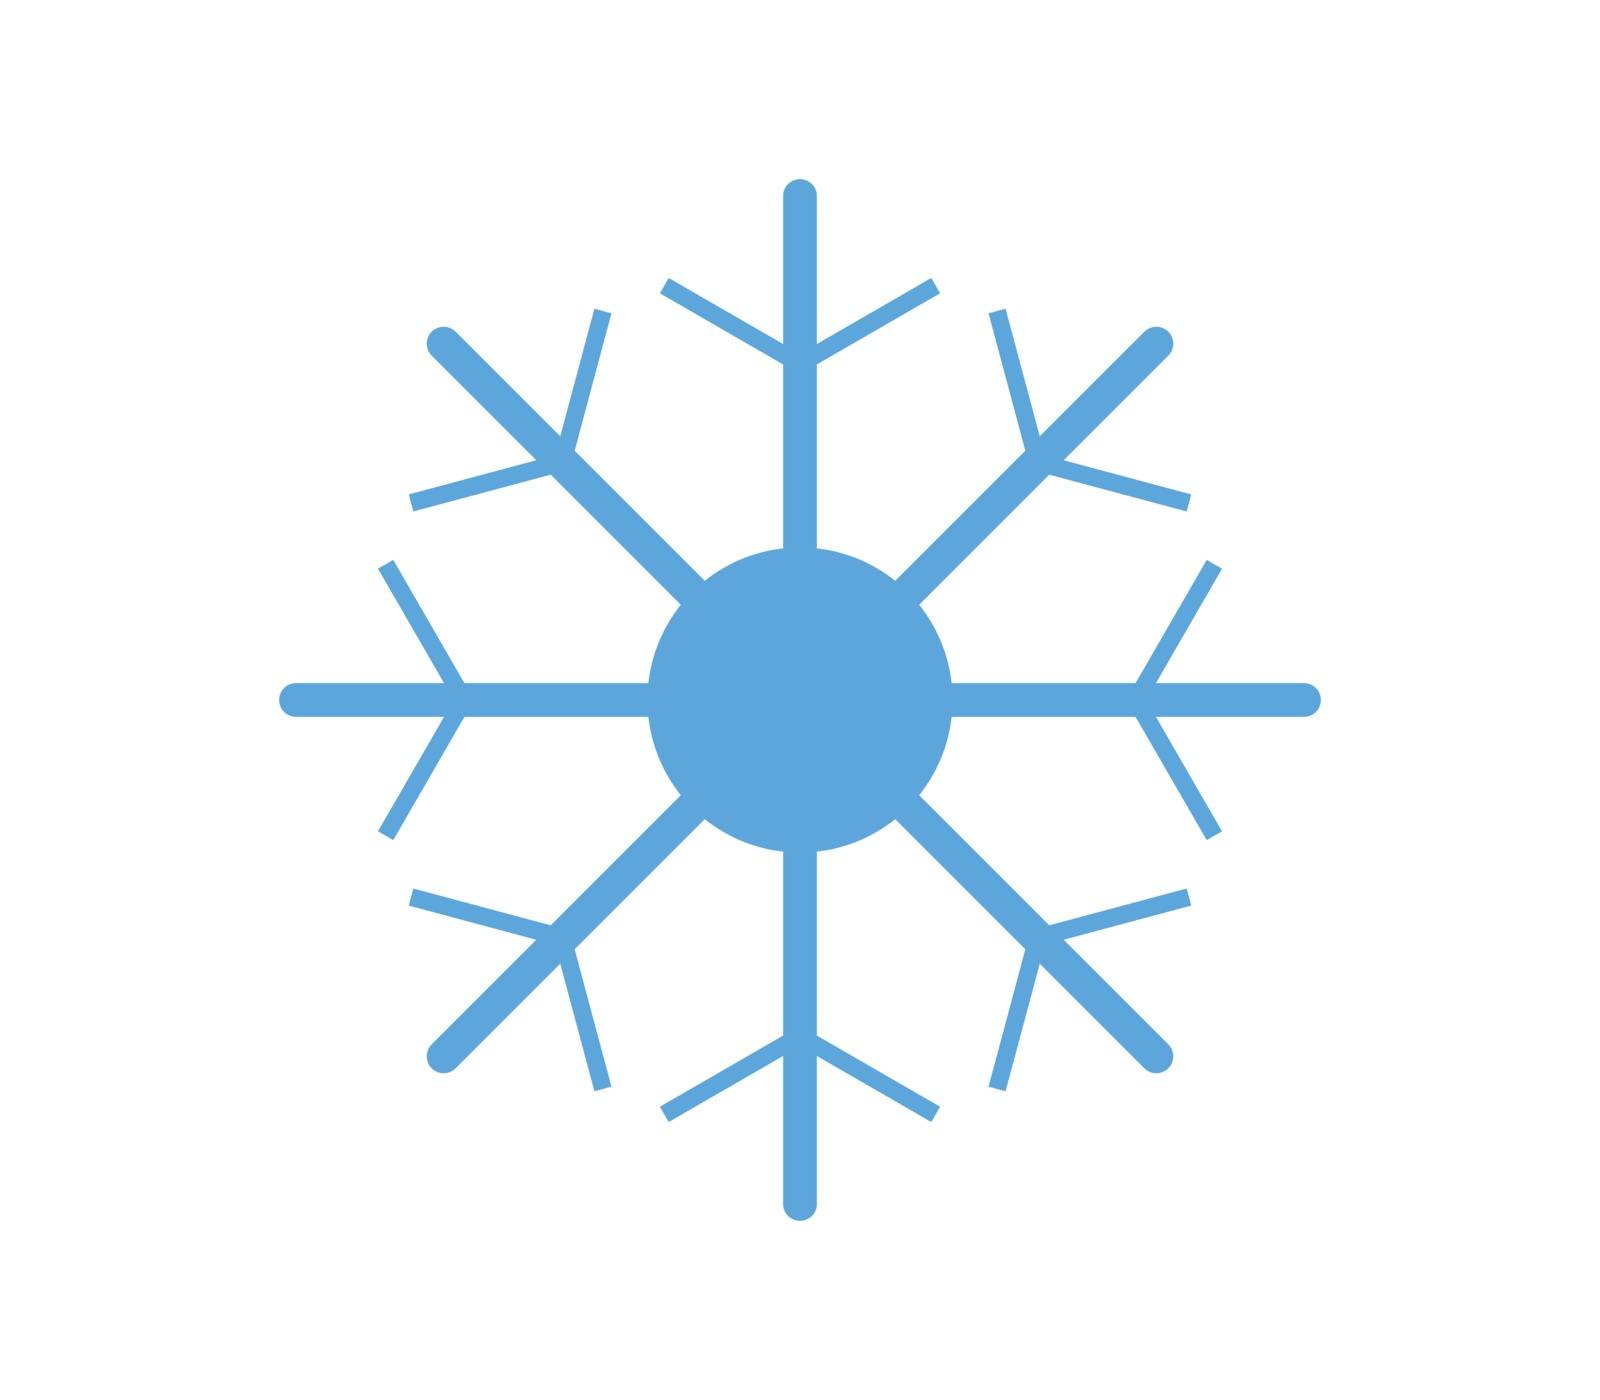 snowflake icon by Mark1987